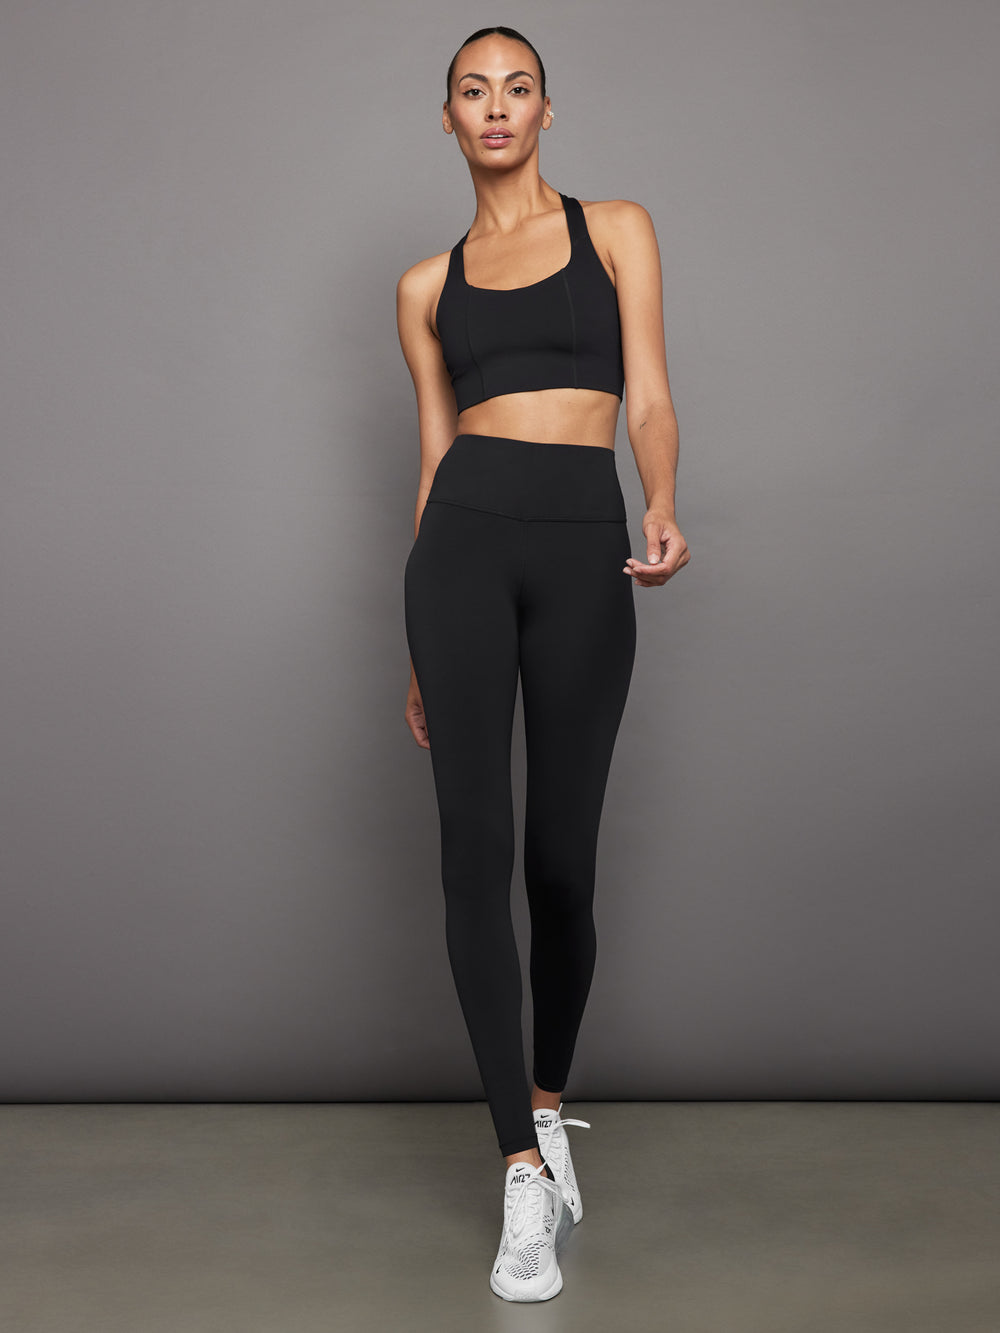 The perfect workout outfit consists of the Dynamic leggings and Cross Back  Sports Bra from the new Gymshark by Nik…